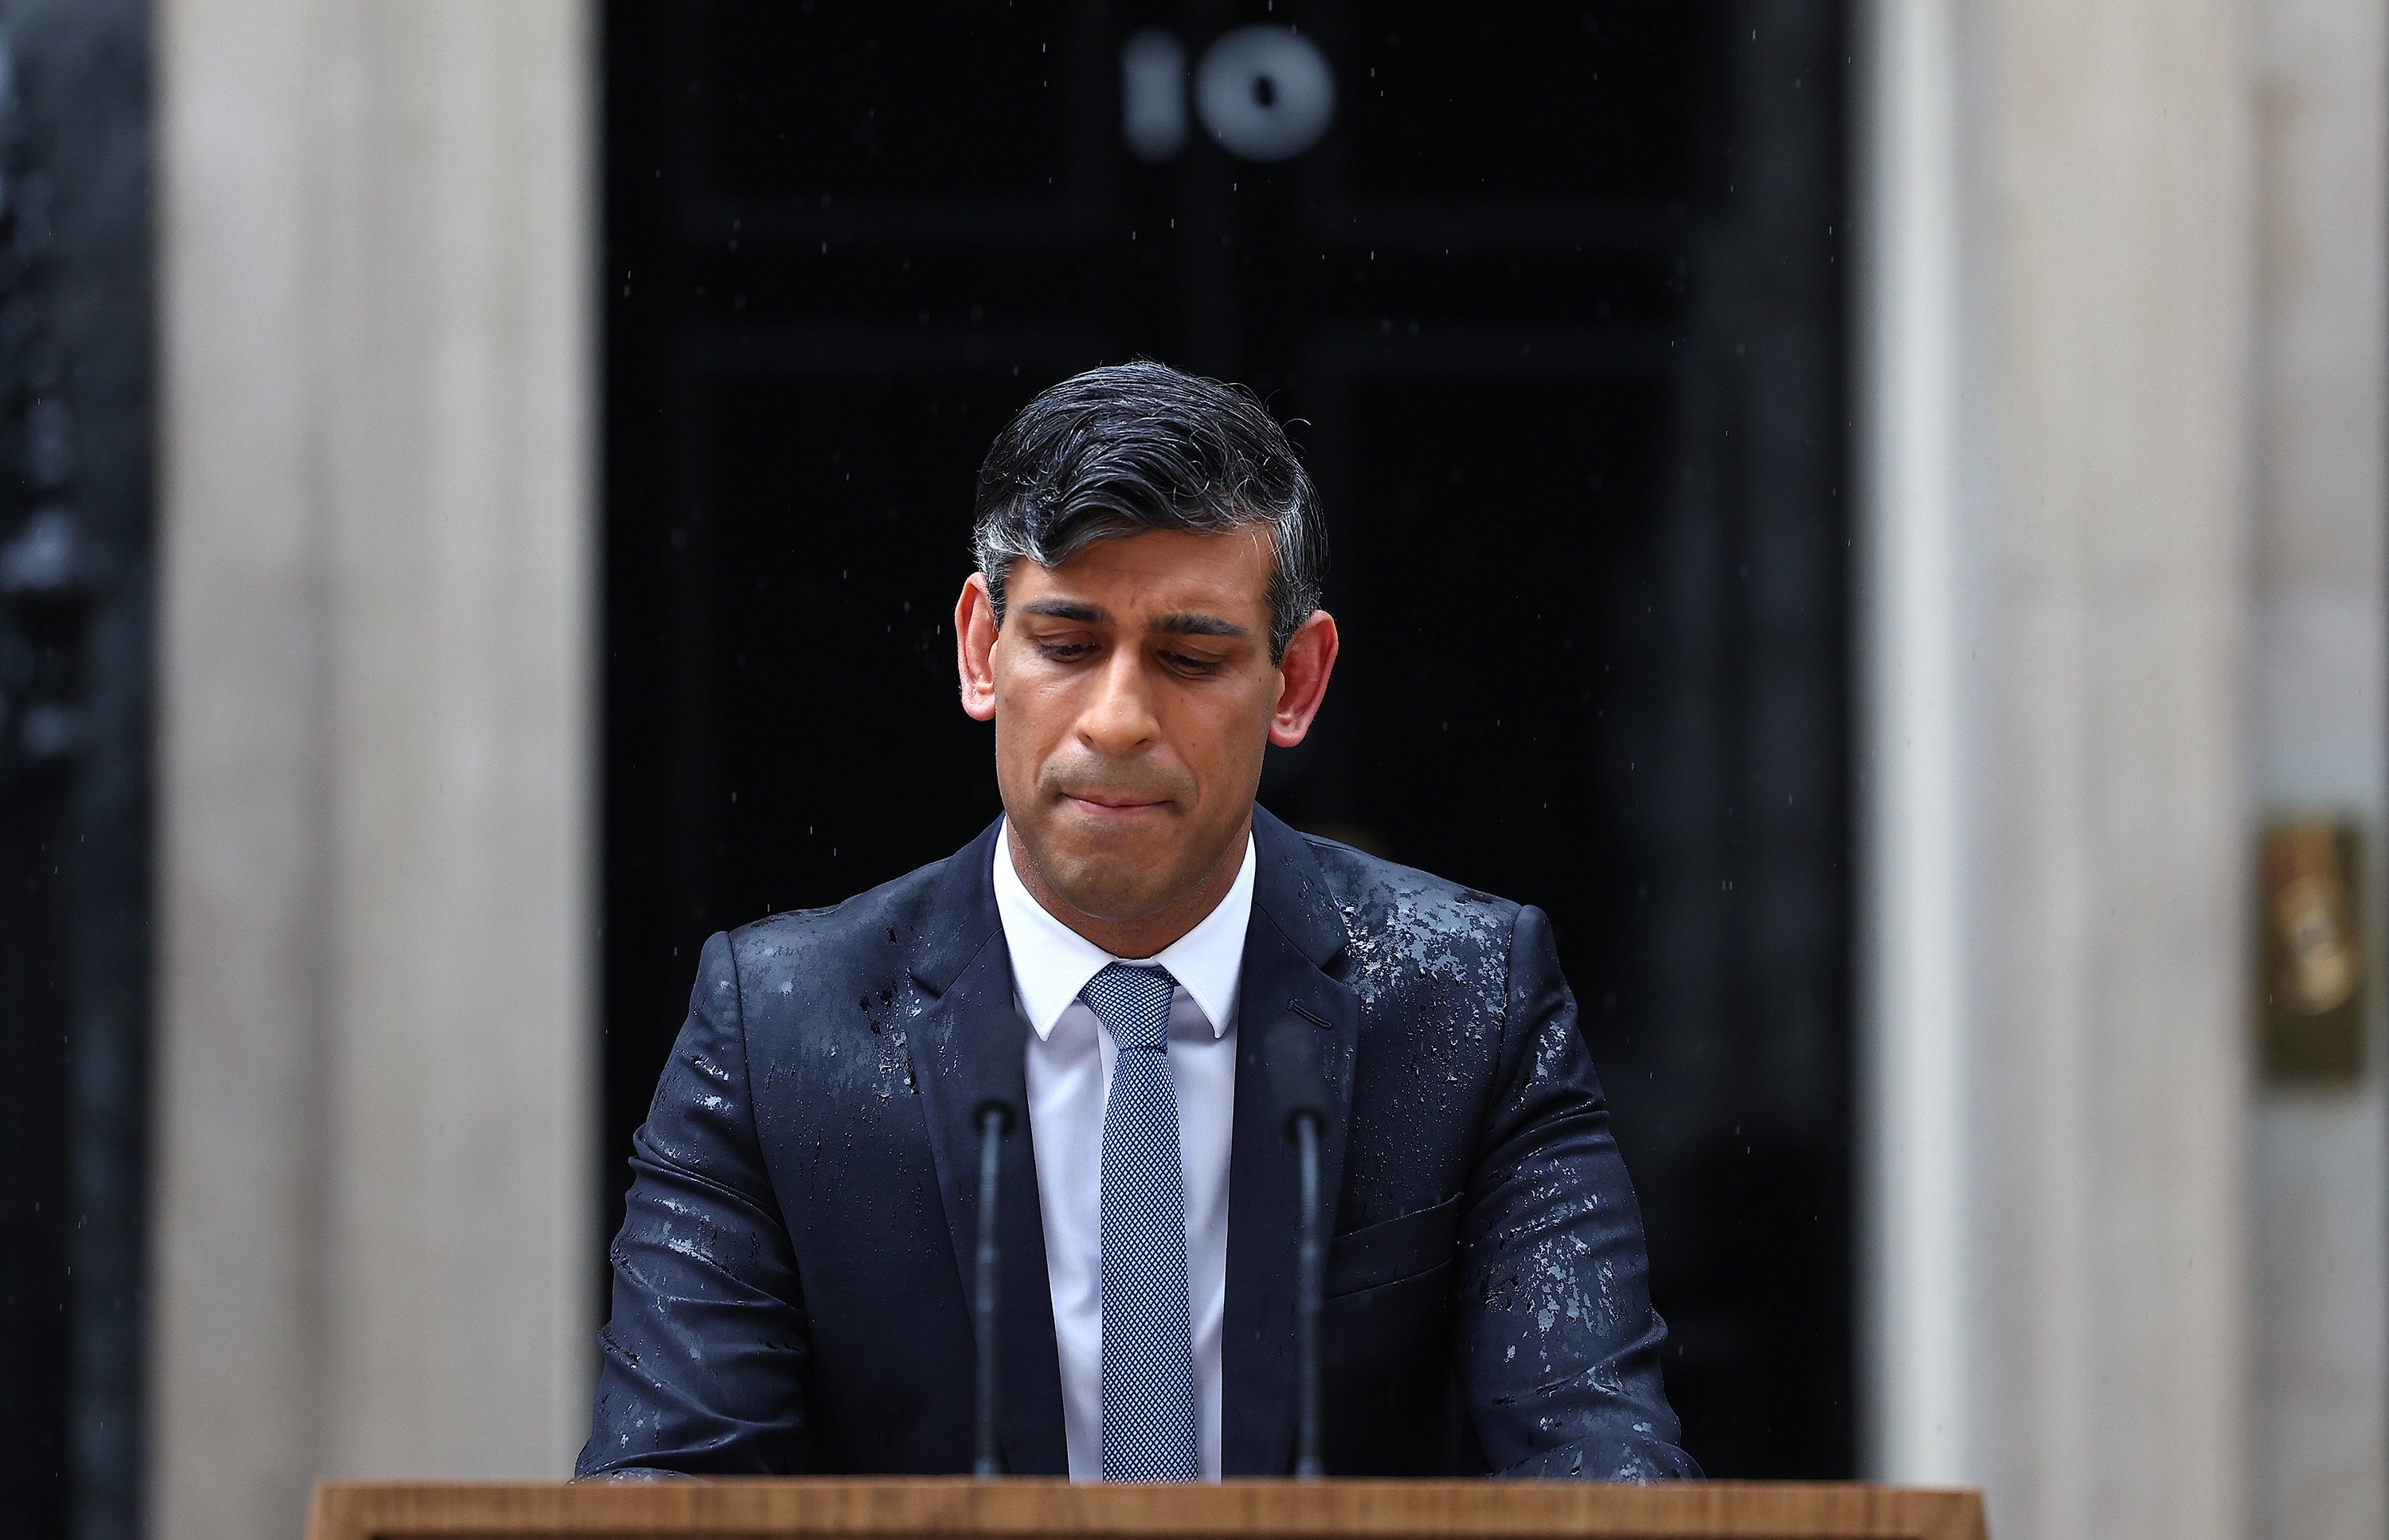 The private reaction of many Conservative MPs was bemusement at Prime Minister Rishi Sunak’s election announcement in pouring rain outside 10 Downing Street on May 22, a picture that has drawn unfavourable commentary and cheeky headlines. Photo: TNS 